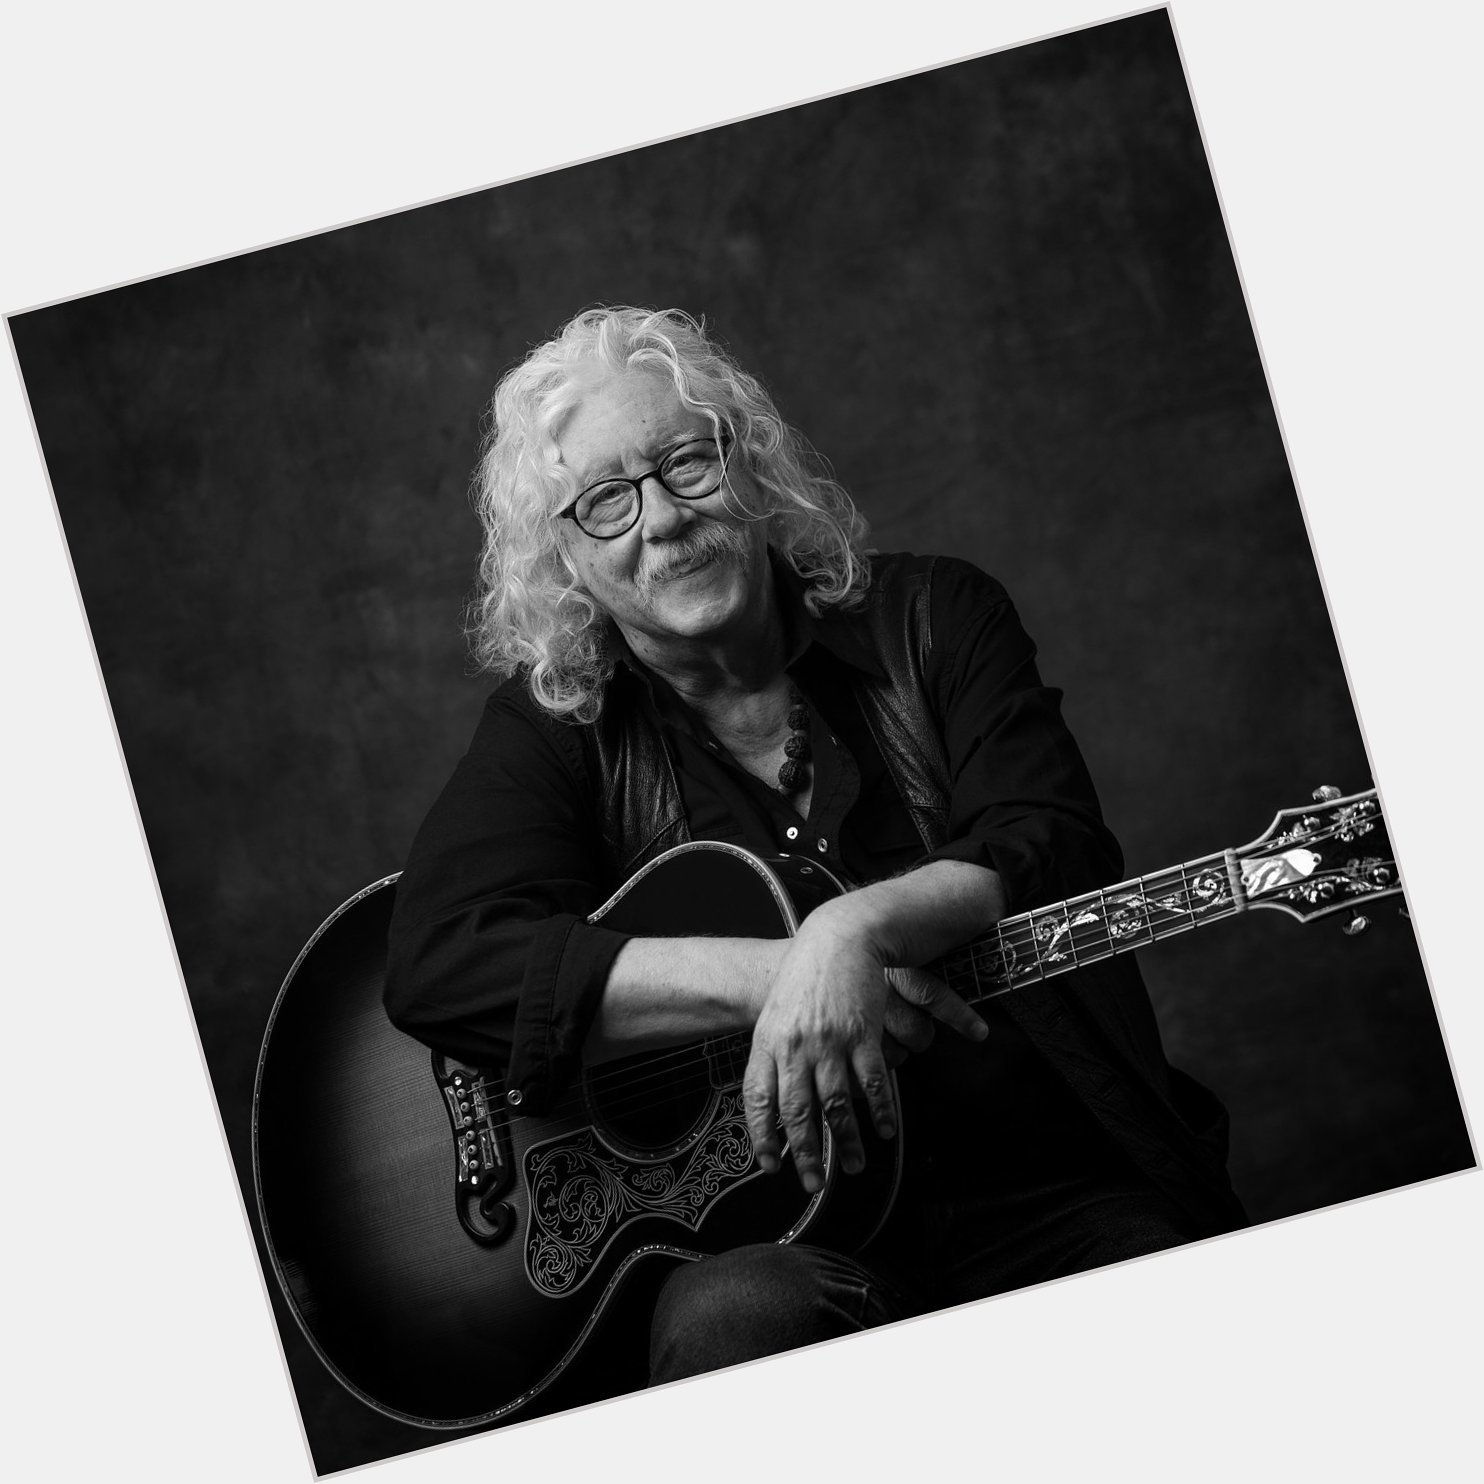 The incredible songwriter Arlo Guthrie ( turns 73 years old today. Everyone wish him a happy birthday! 